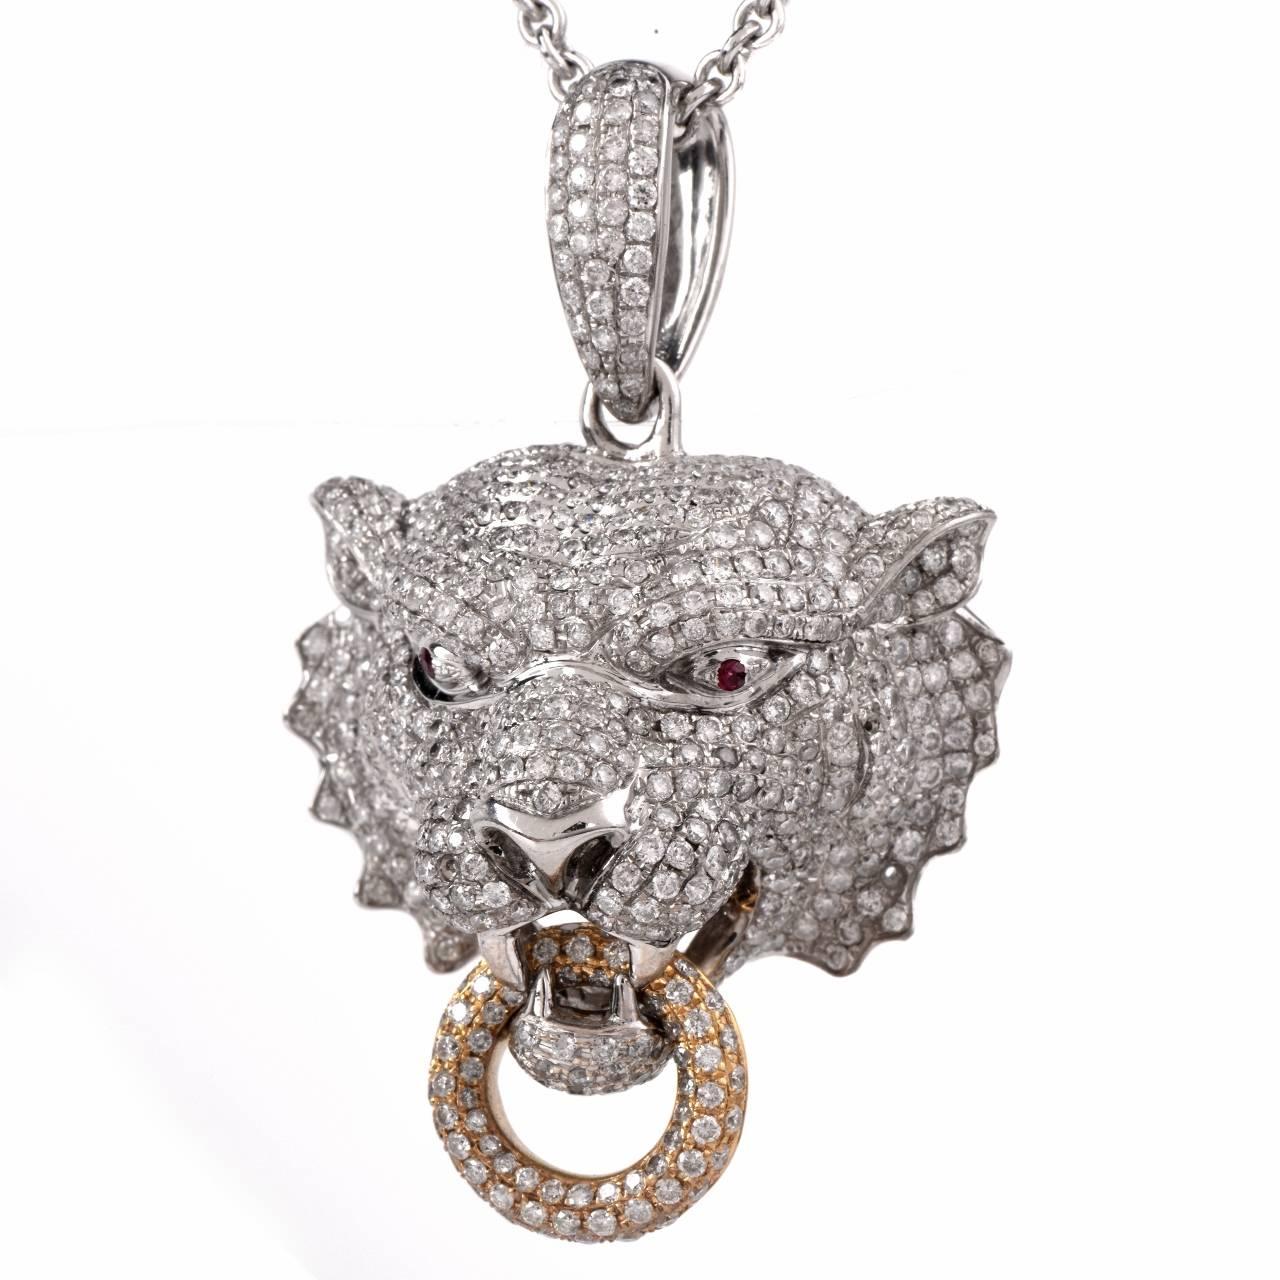 This  Diamond pendant is crafted in solid 18K white gold, weighing approx: 19.6 grams and measuring approx: 45mm x 30mm x 19.5mm.  This completely diamond embellished tiger's head has not spared one detail.  The eyes shine with 2 genuine red rubies